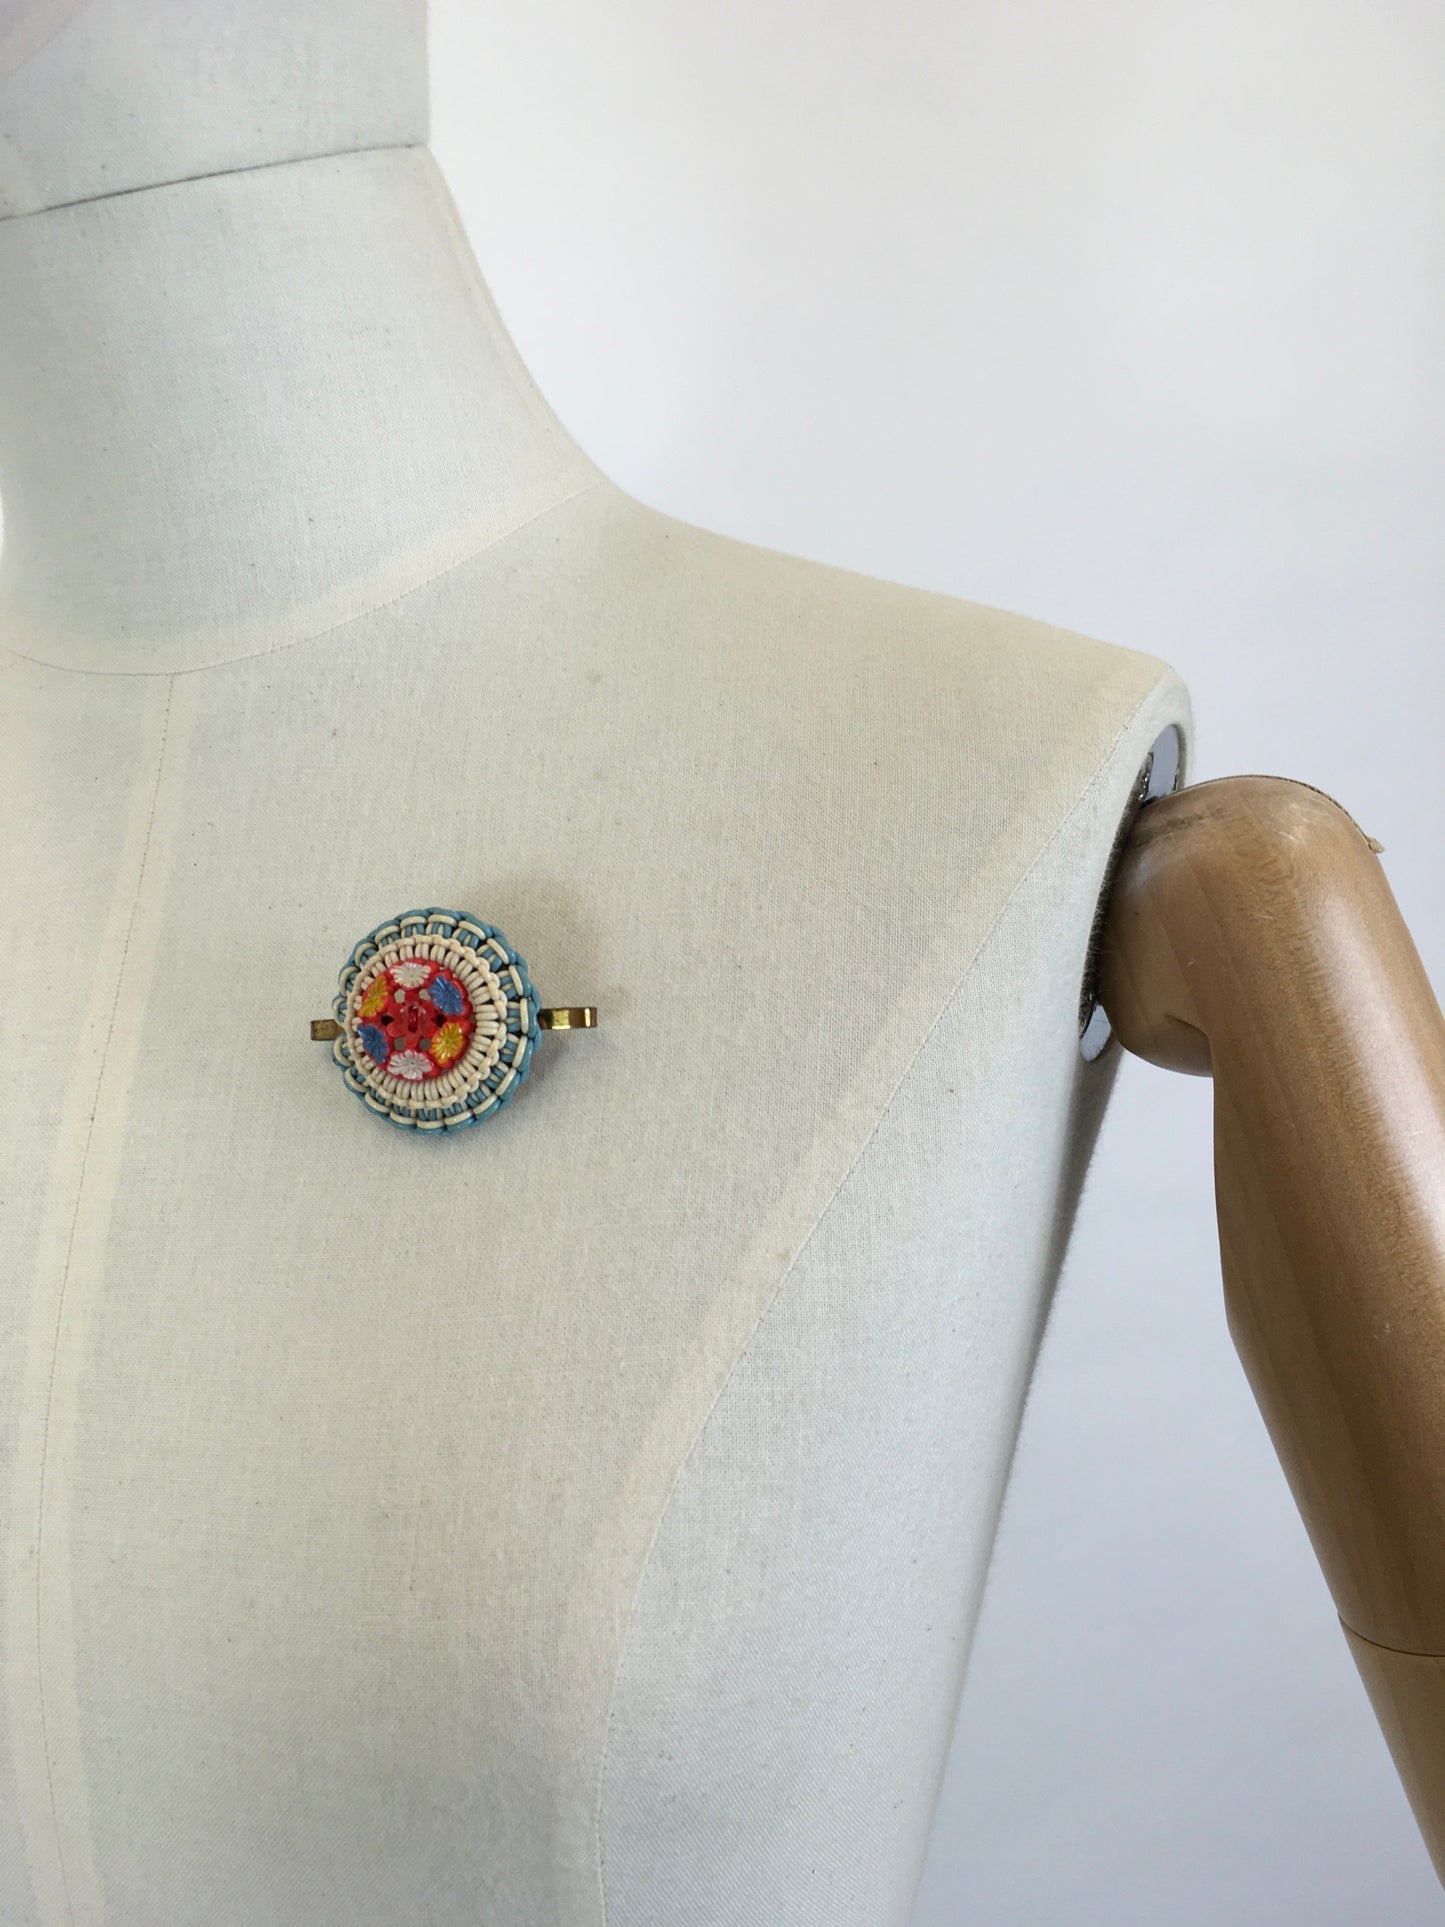 Original 1940’s Make Do and Mend Telephone Cord Brooch - In A Soft Blue & Cream with Red Floral Button